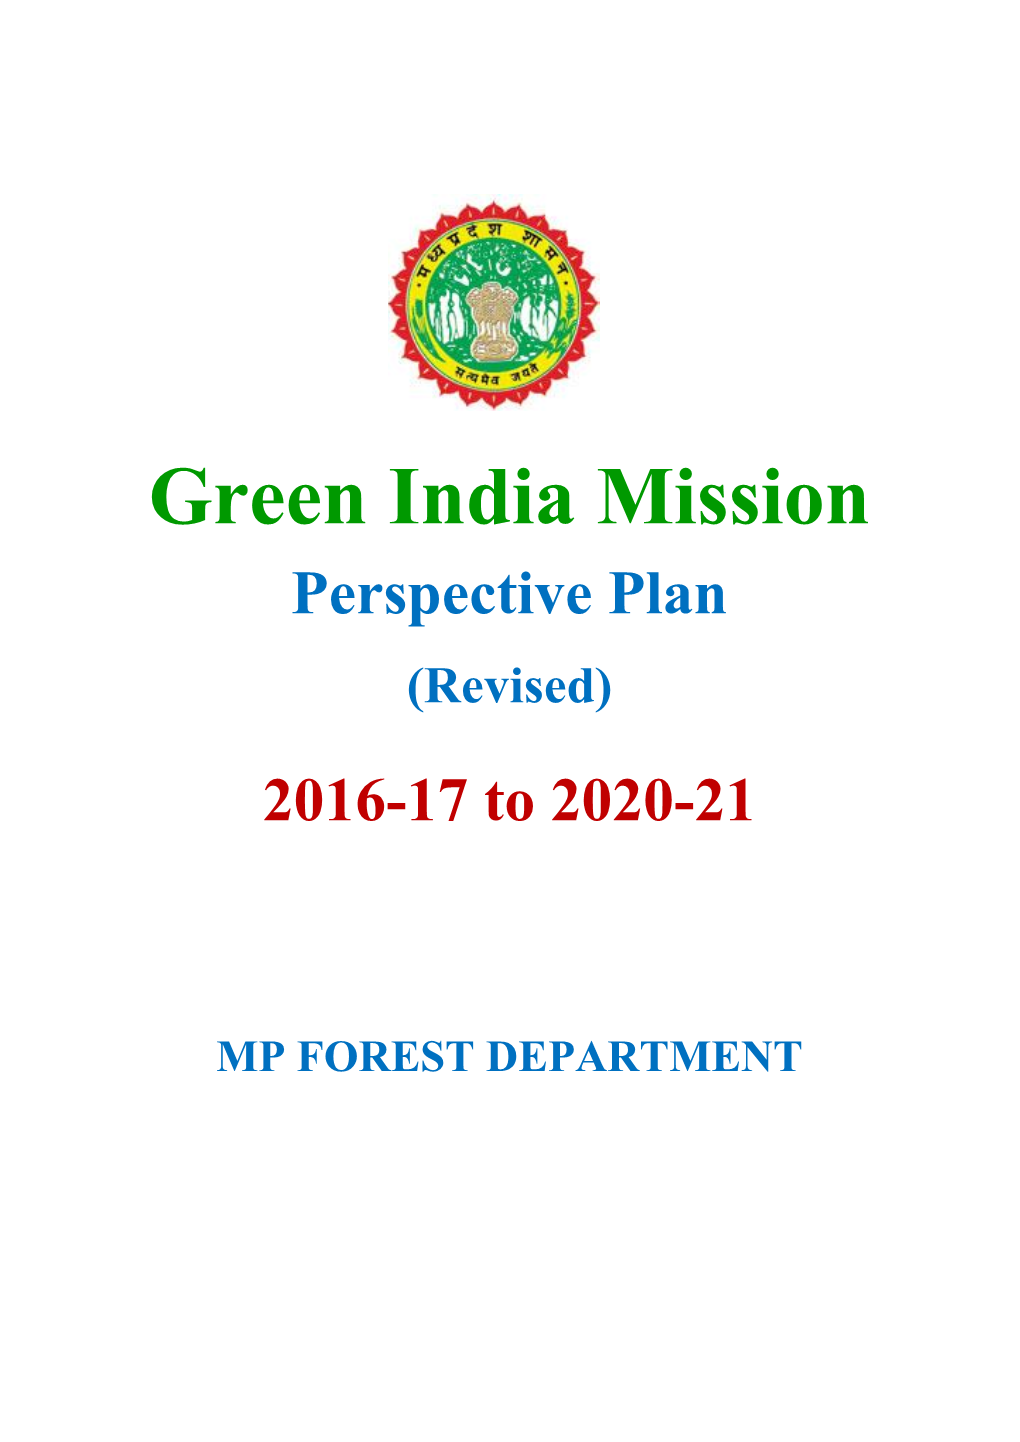 Green India Mission Perspective Plan (Revised)